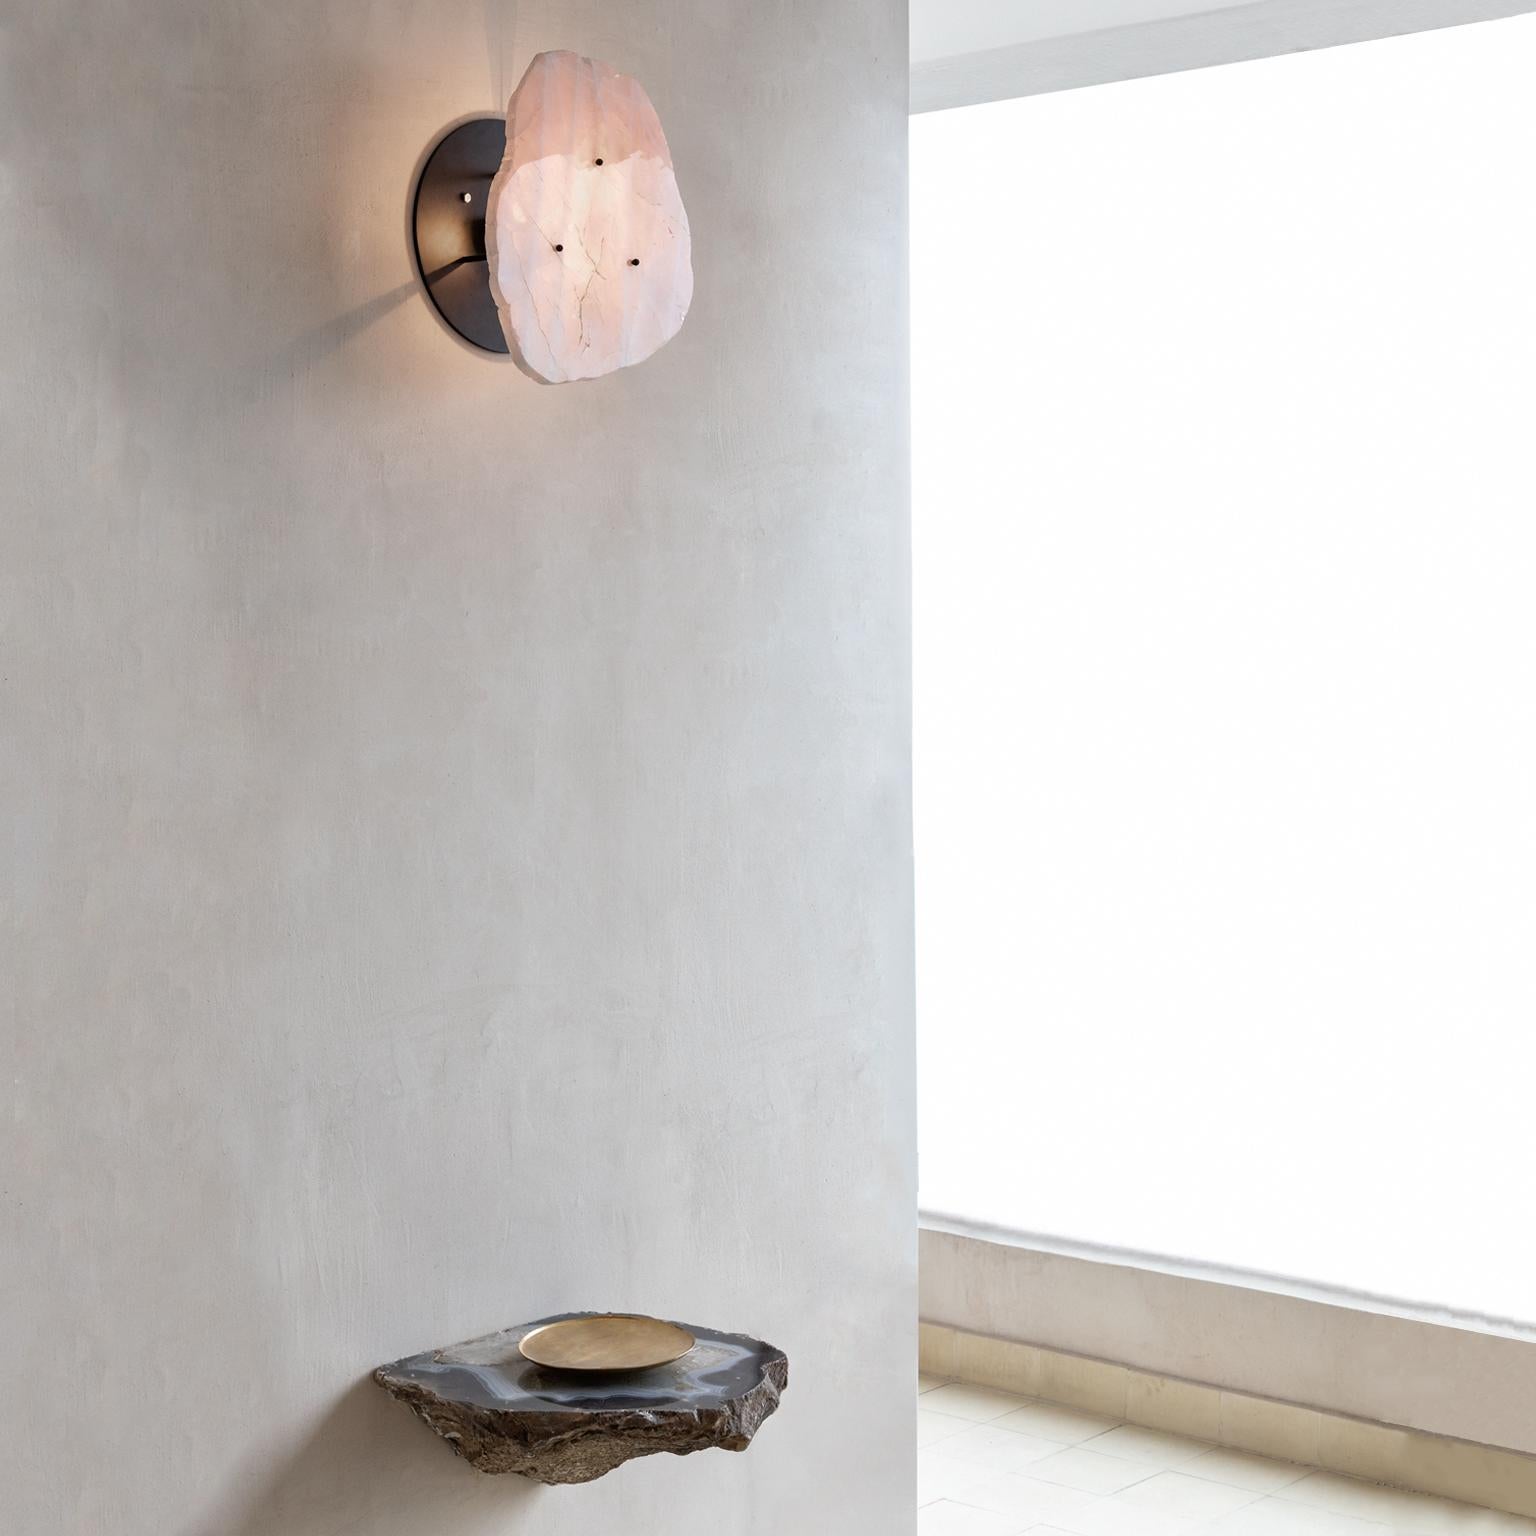 Contemporary wall light, in carbon steel and crystal.
Produced in São Paulo, Brazil.

This contemporary crystal and carbon steel wall light was meticulously handmade by master artisans one delicate piece at a time. It is therefore quite difficult,